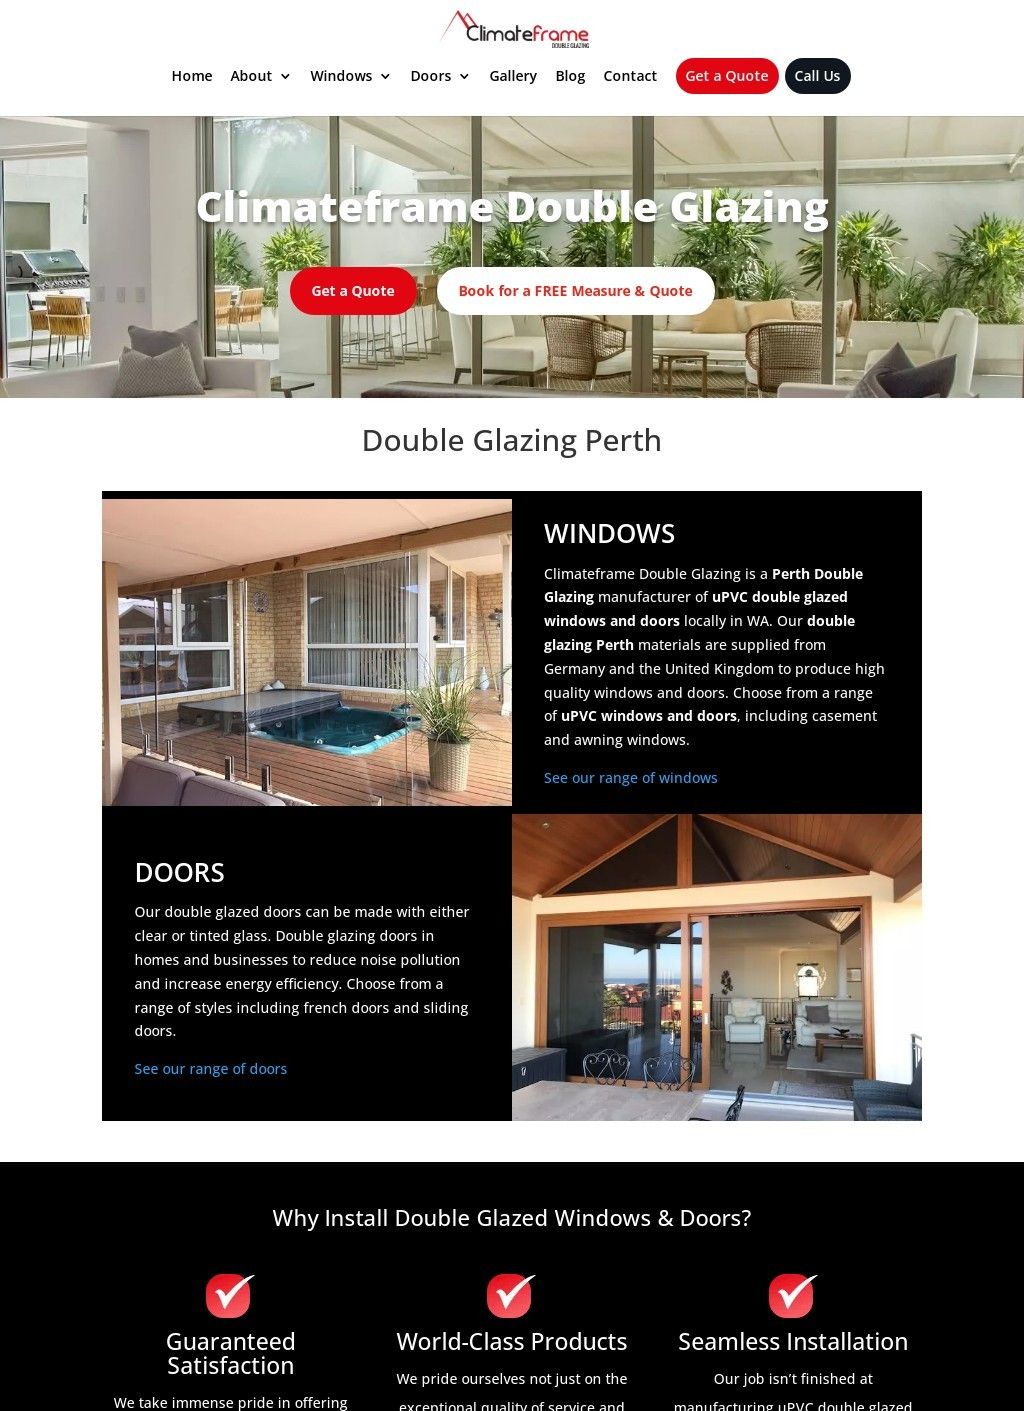 Climateframe Double Glazing Perth